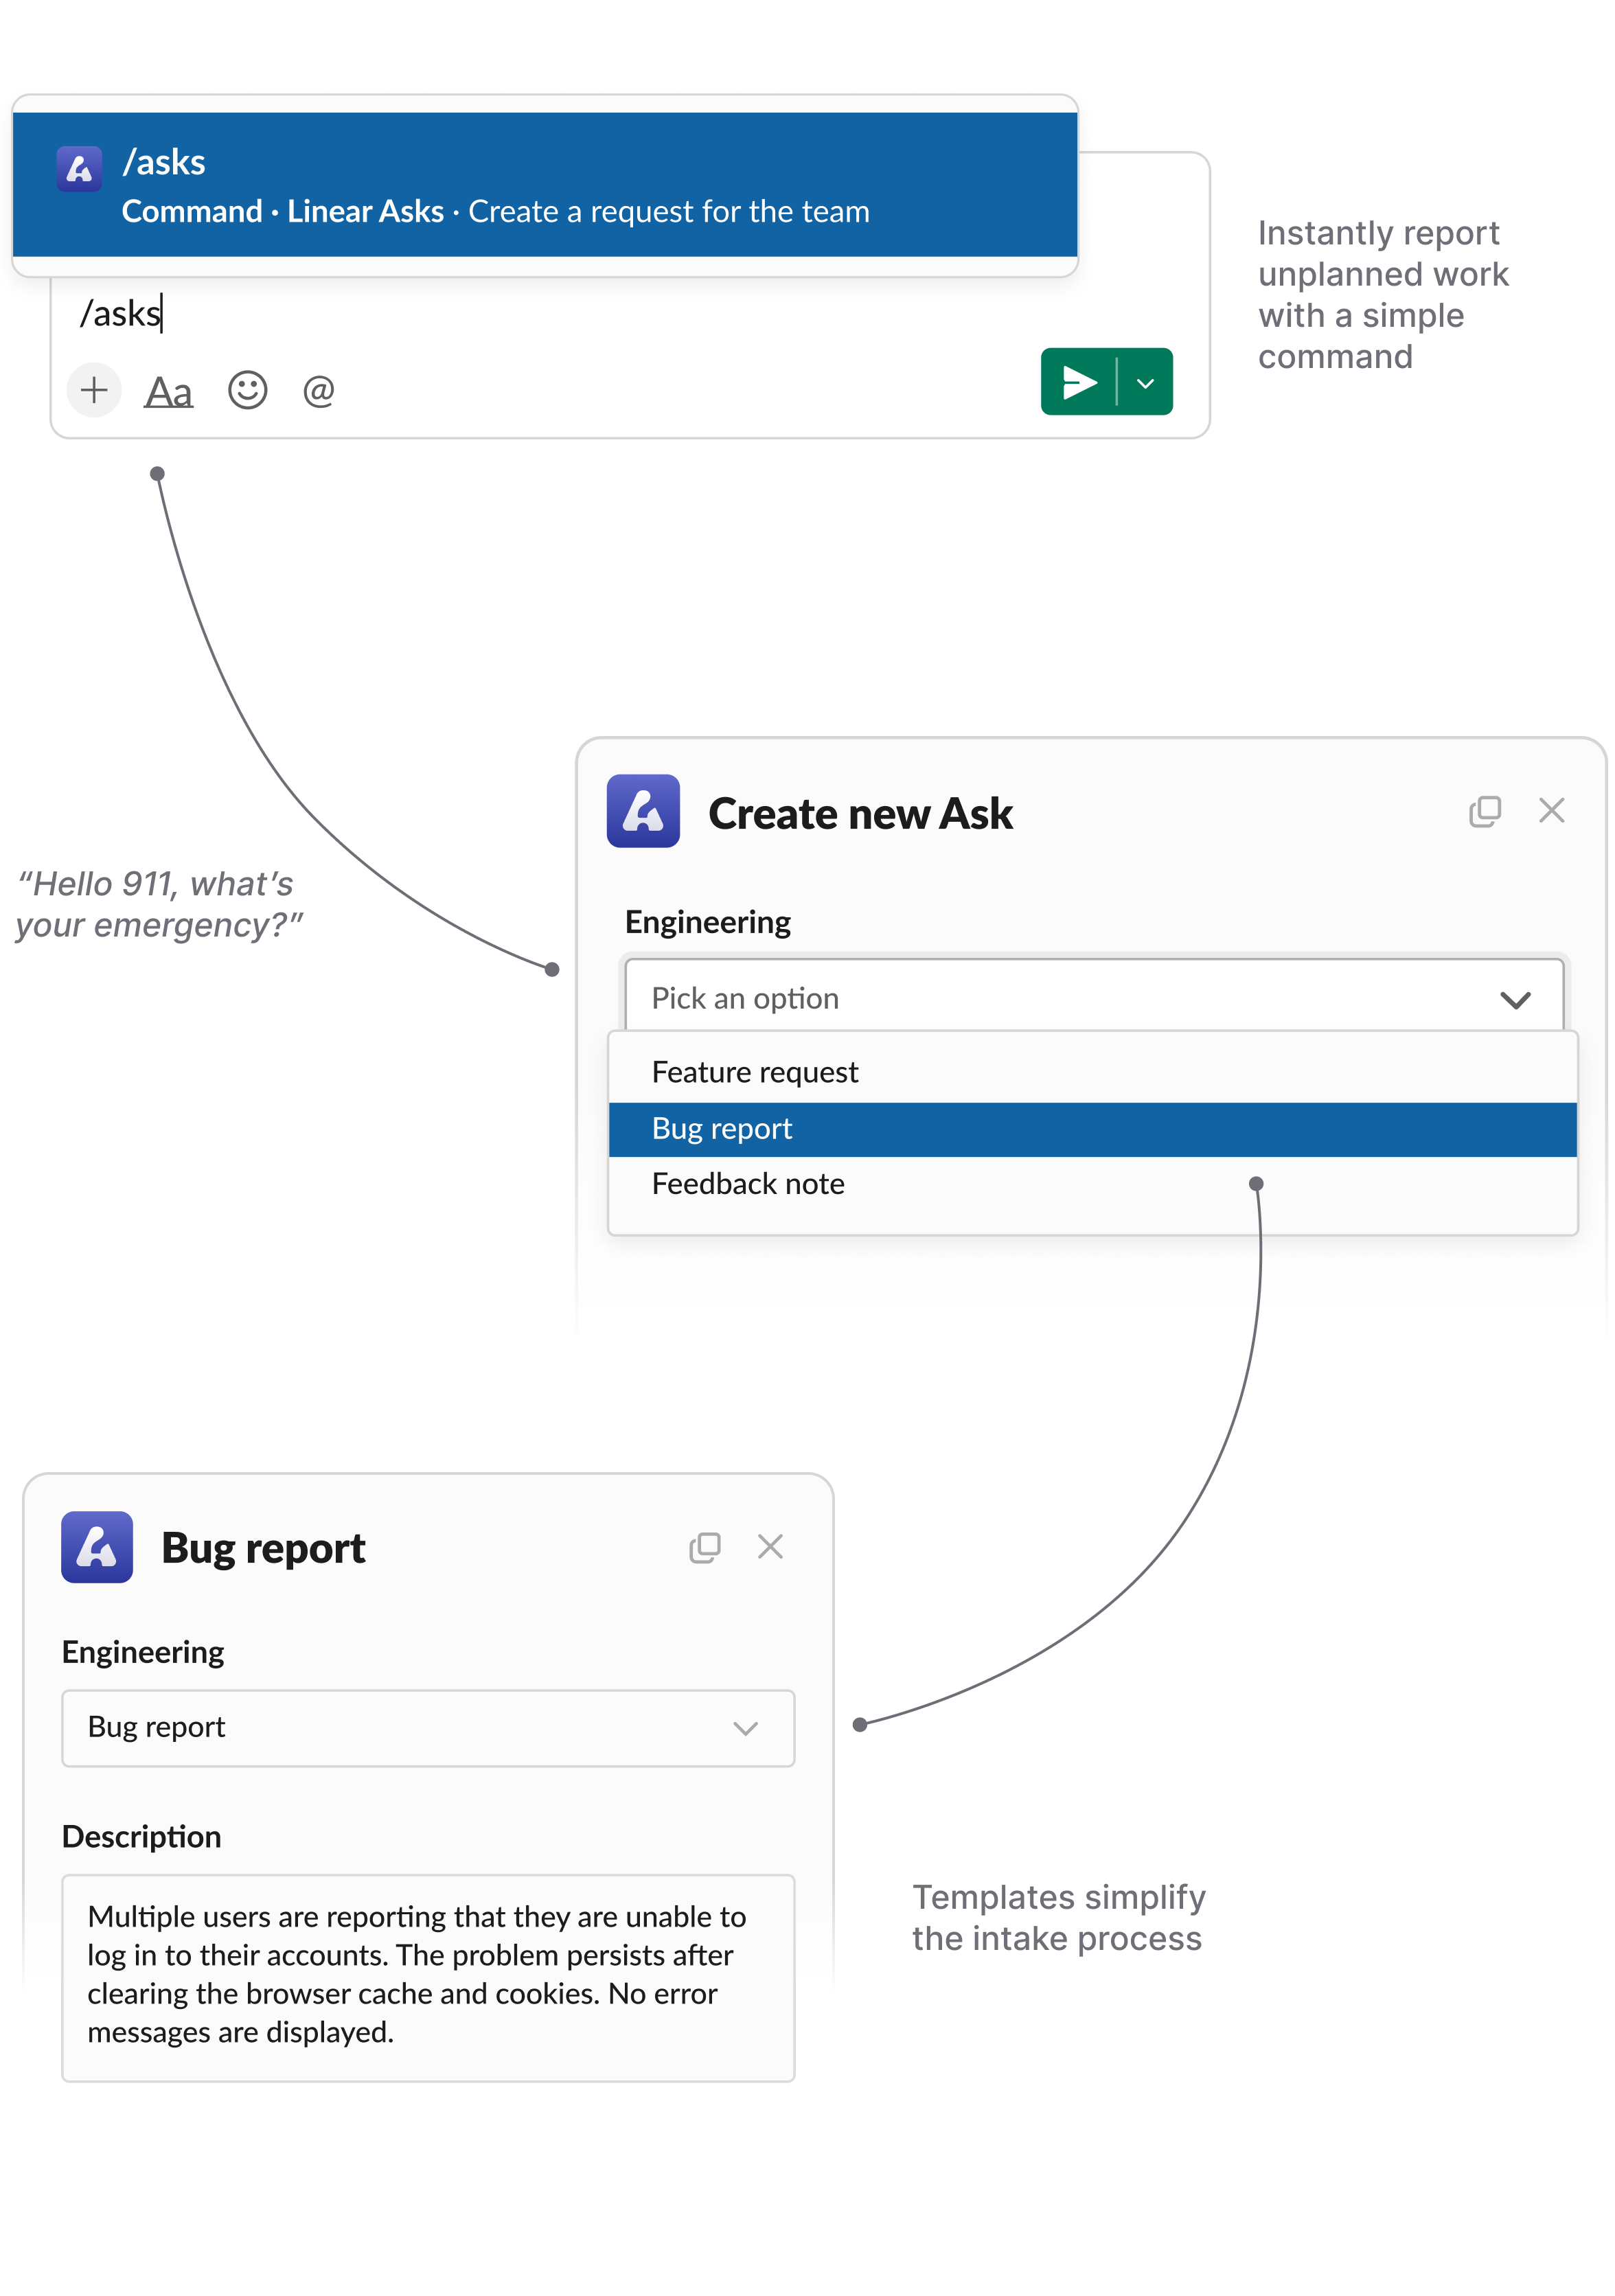 Screenshots of the Linear Asks workflow. From initial creation, to template selection, to actually submitting the final request.